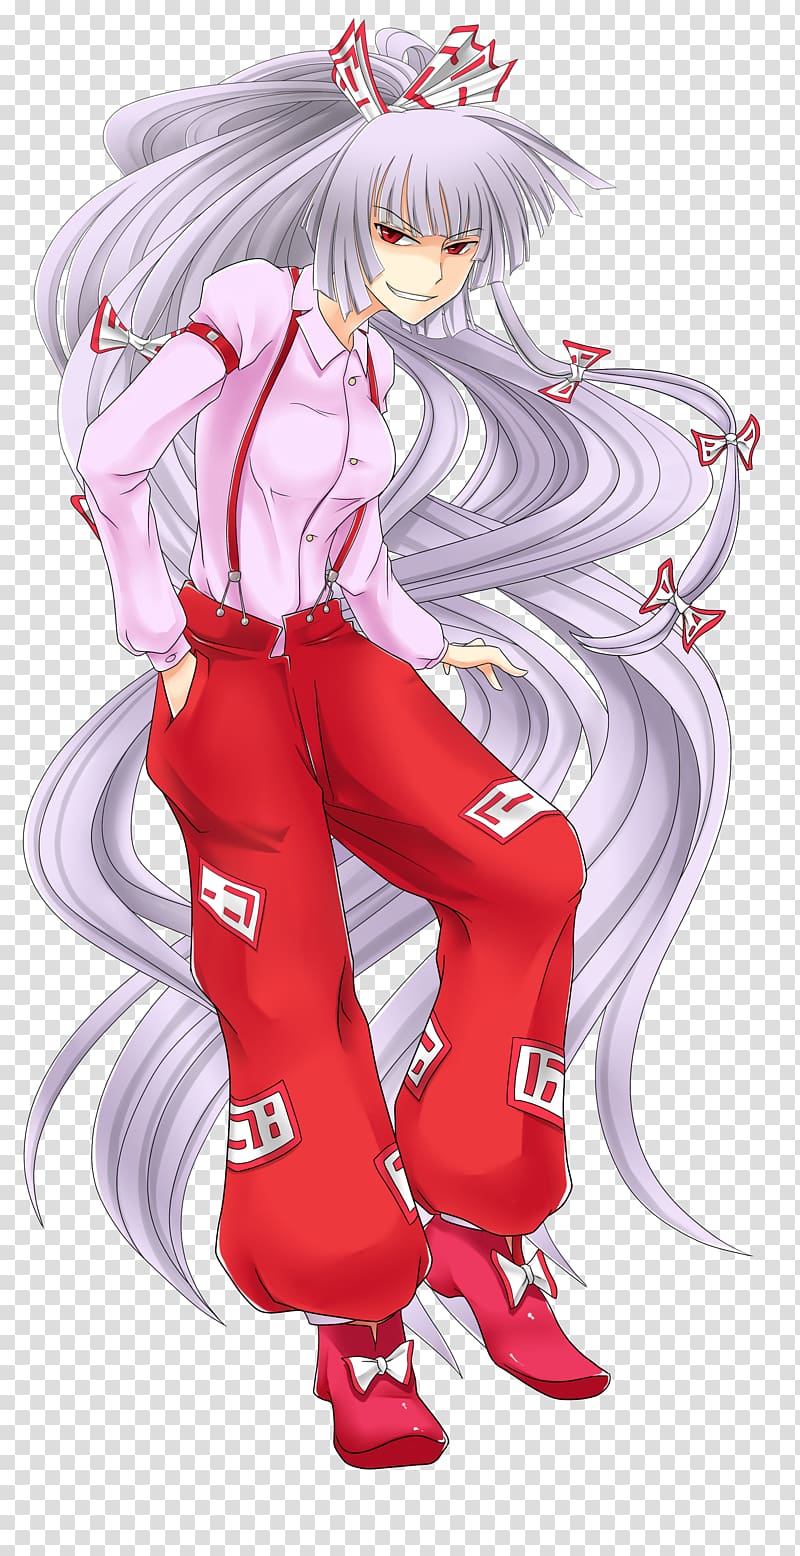 Touhou Project Playing card Mangaka, younger sister transparent background PNG clipart